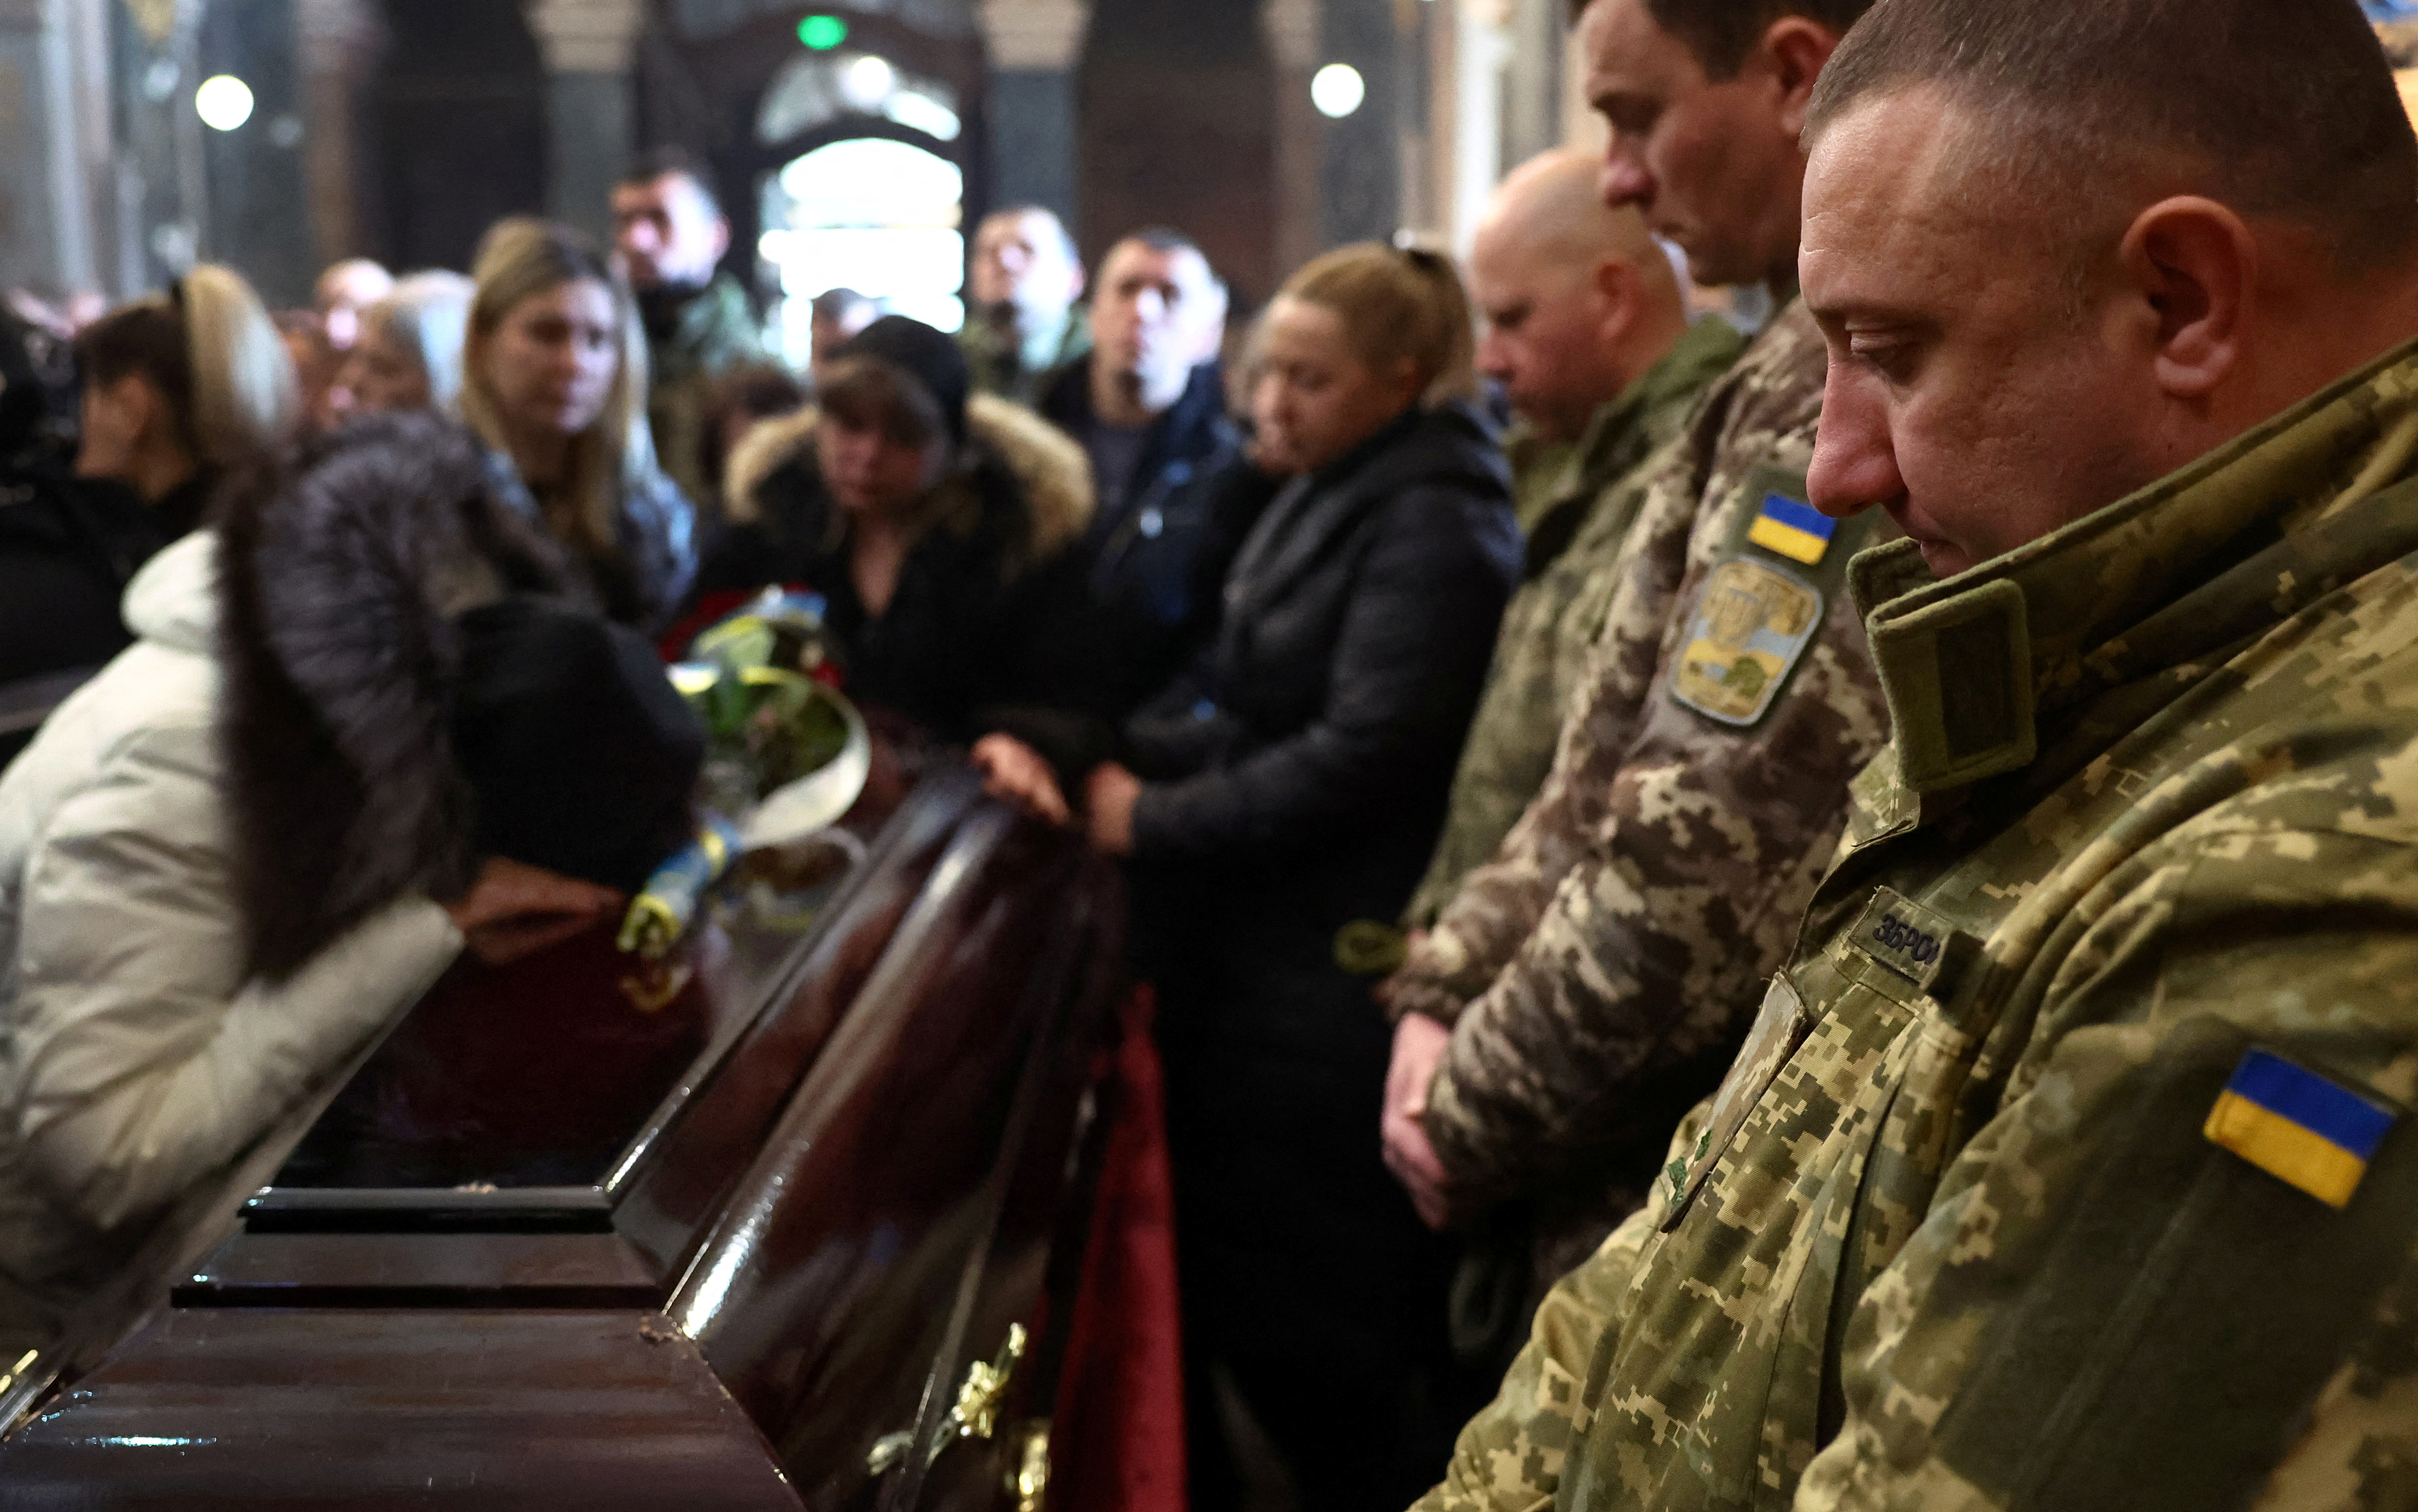 Memorial and funeral service for fallen soldiers following the ongoing Russian invasion in Lviv